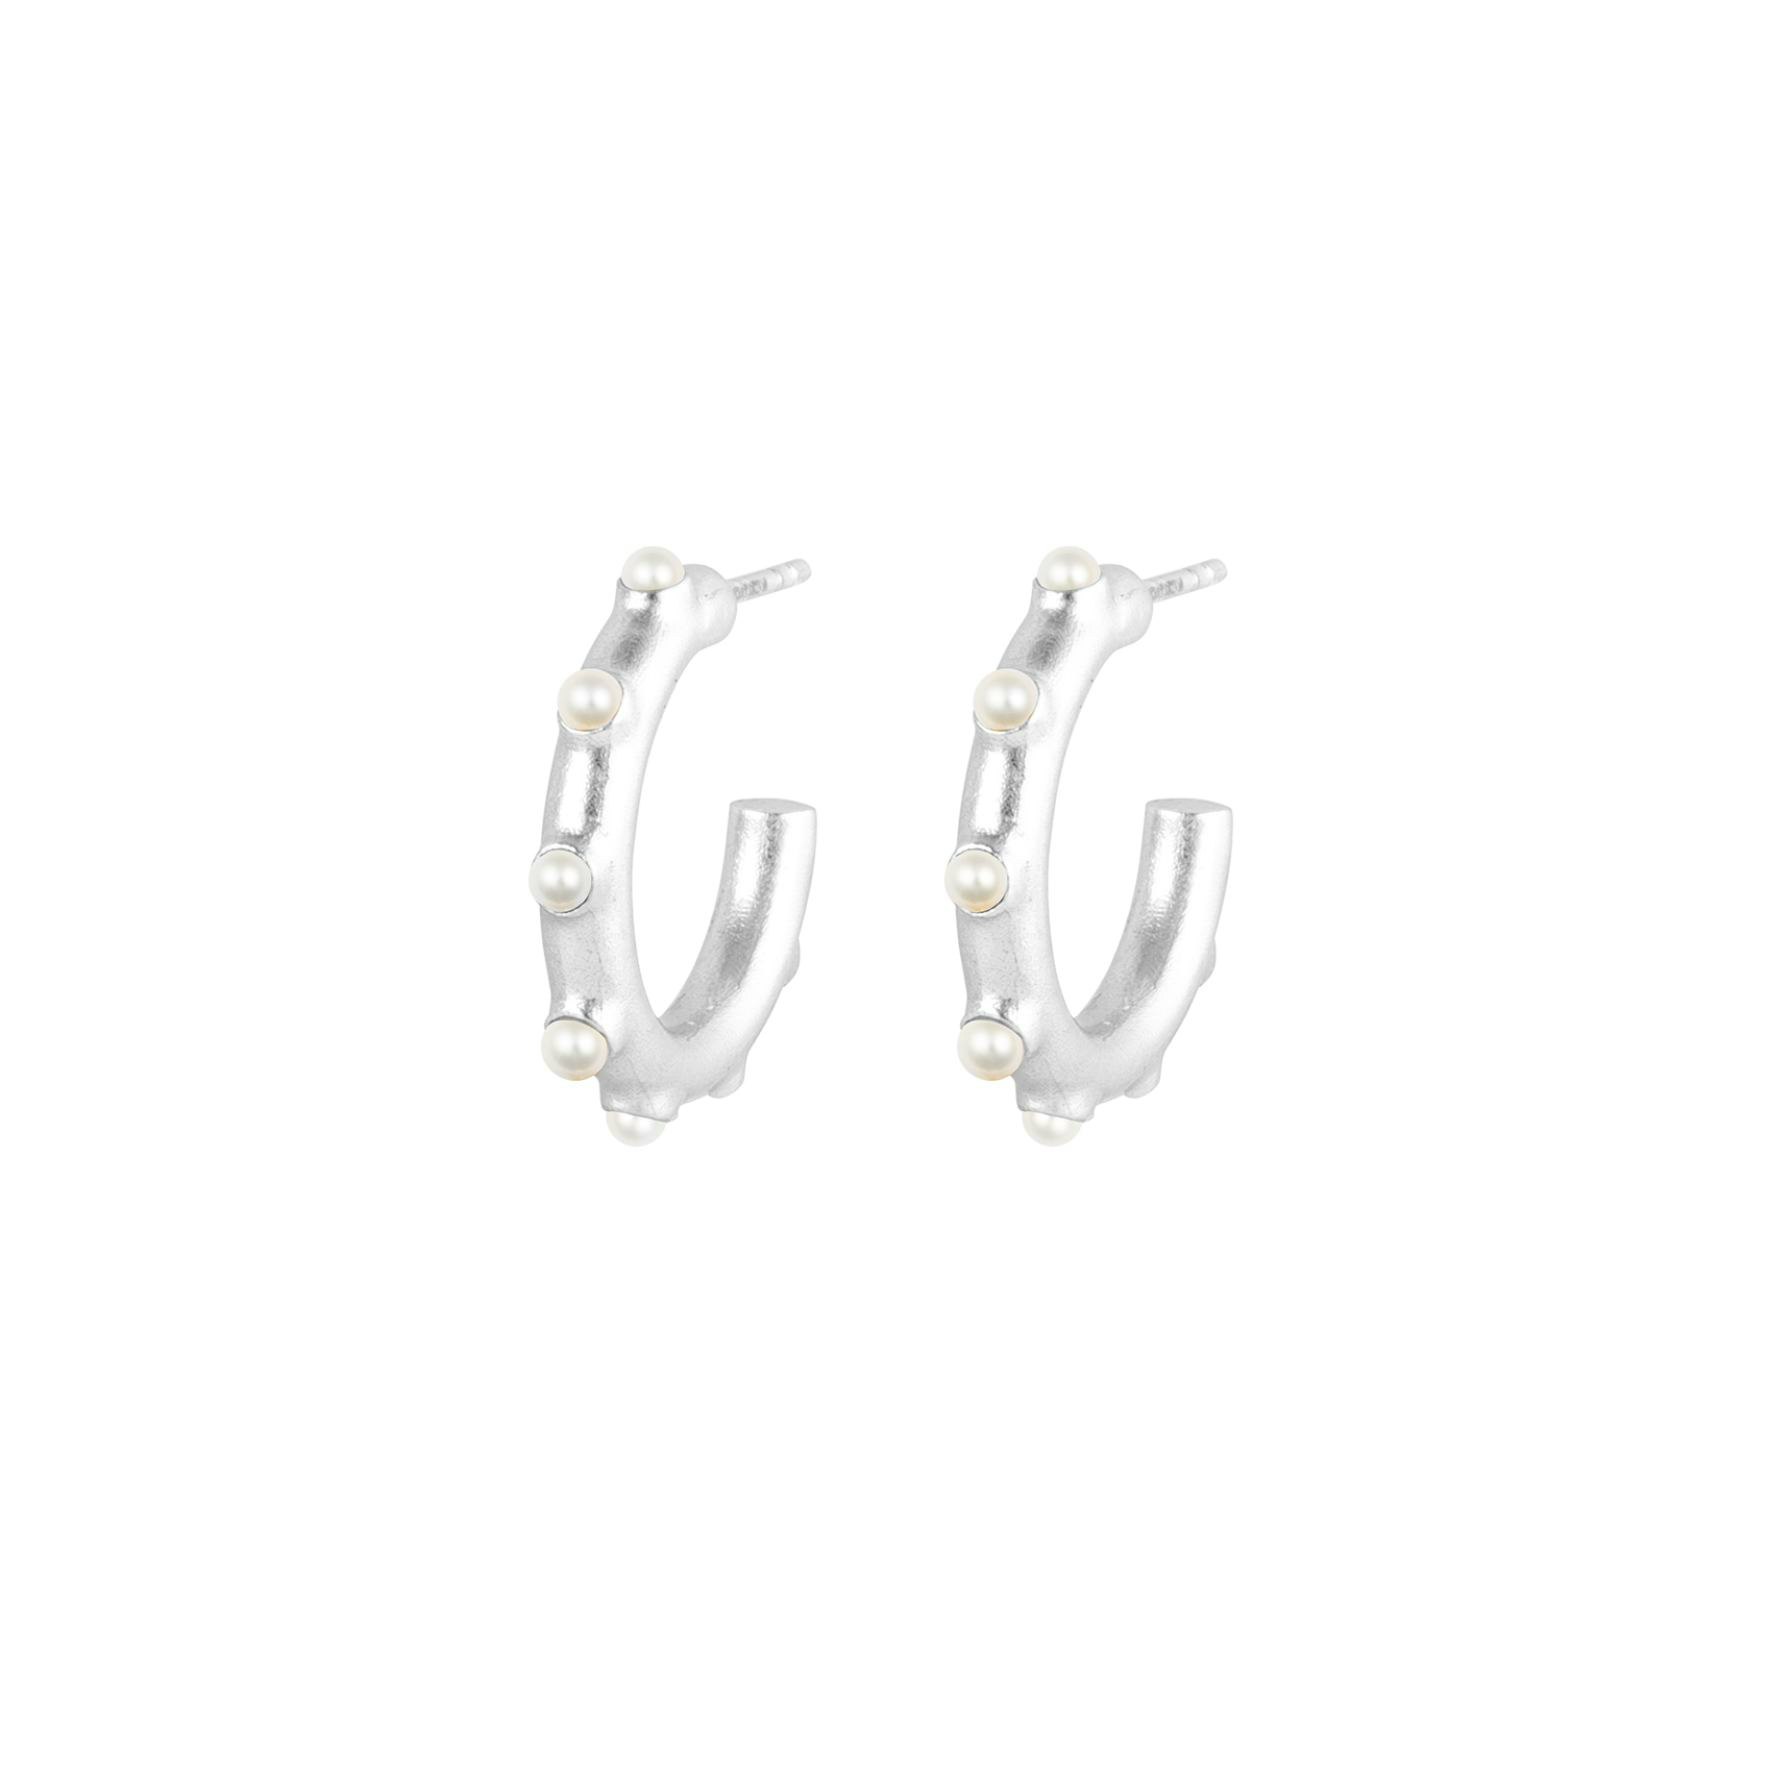 Trace Of Venus Earrings from House Of Vincent in Silver Sterling 925